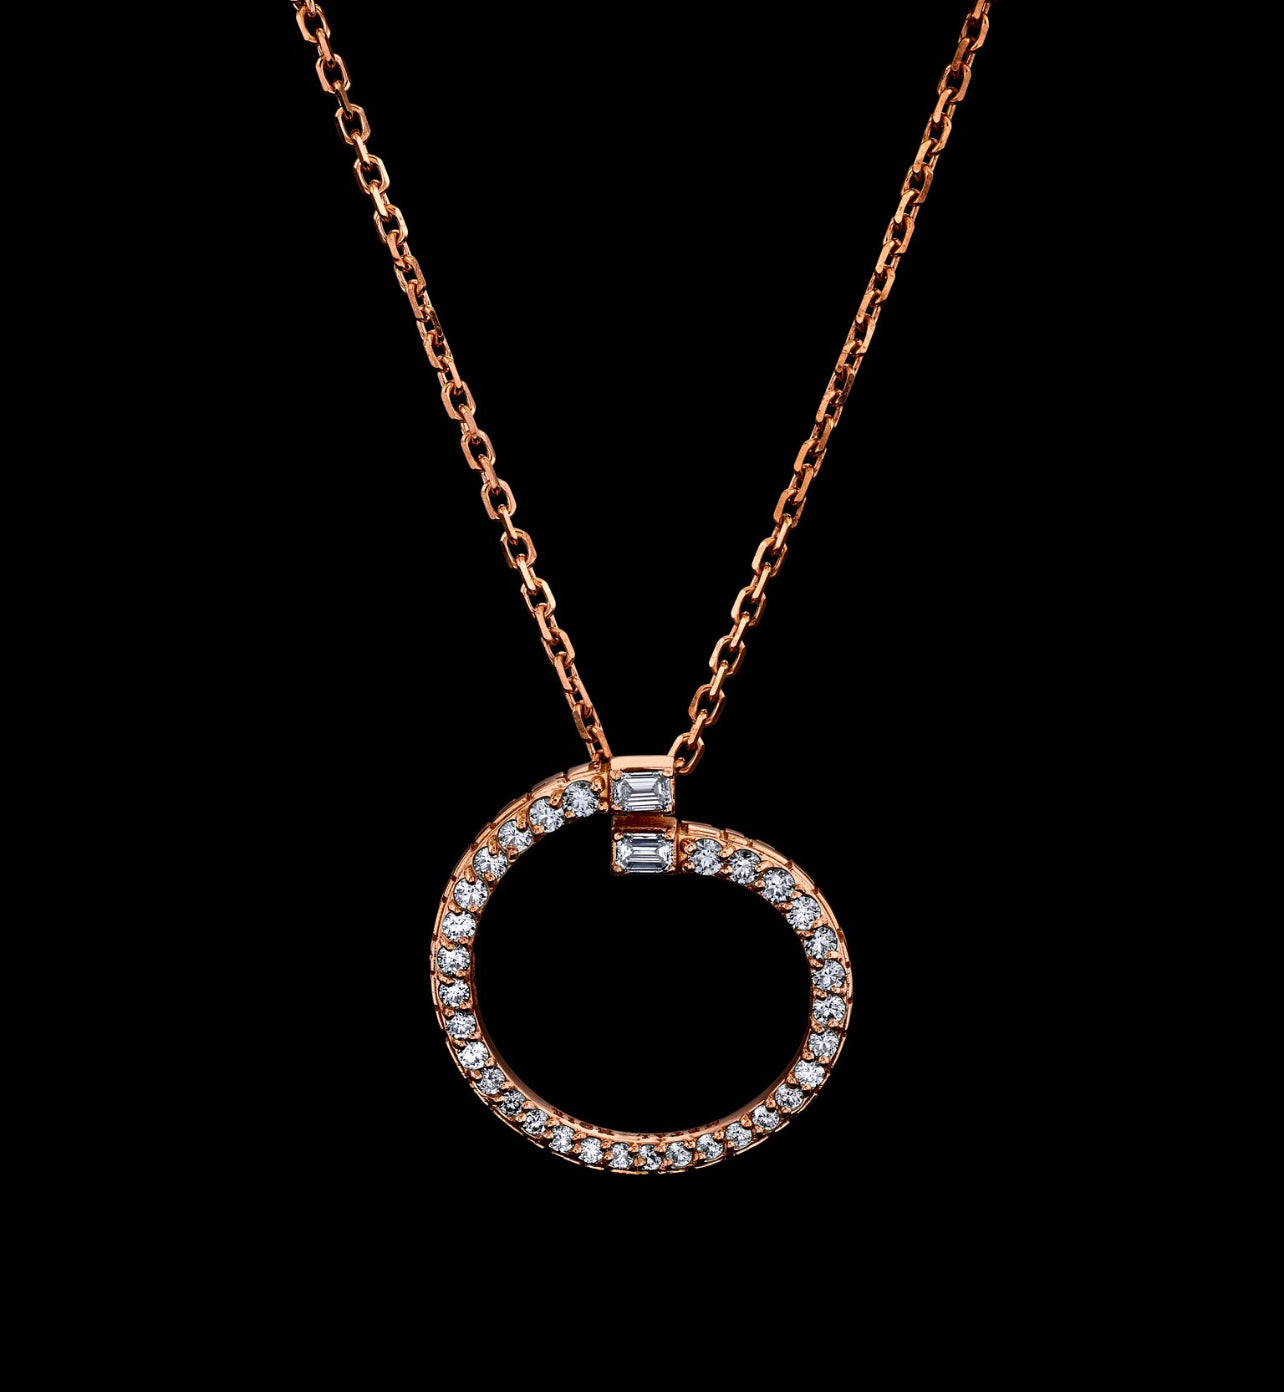 Spiral Collection Large Spiral Necklace with diamonds